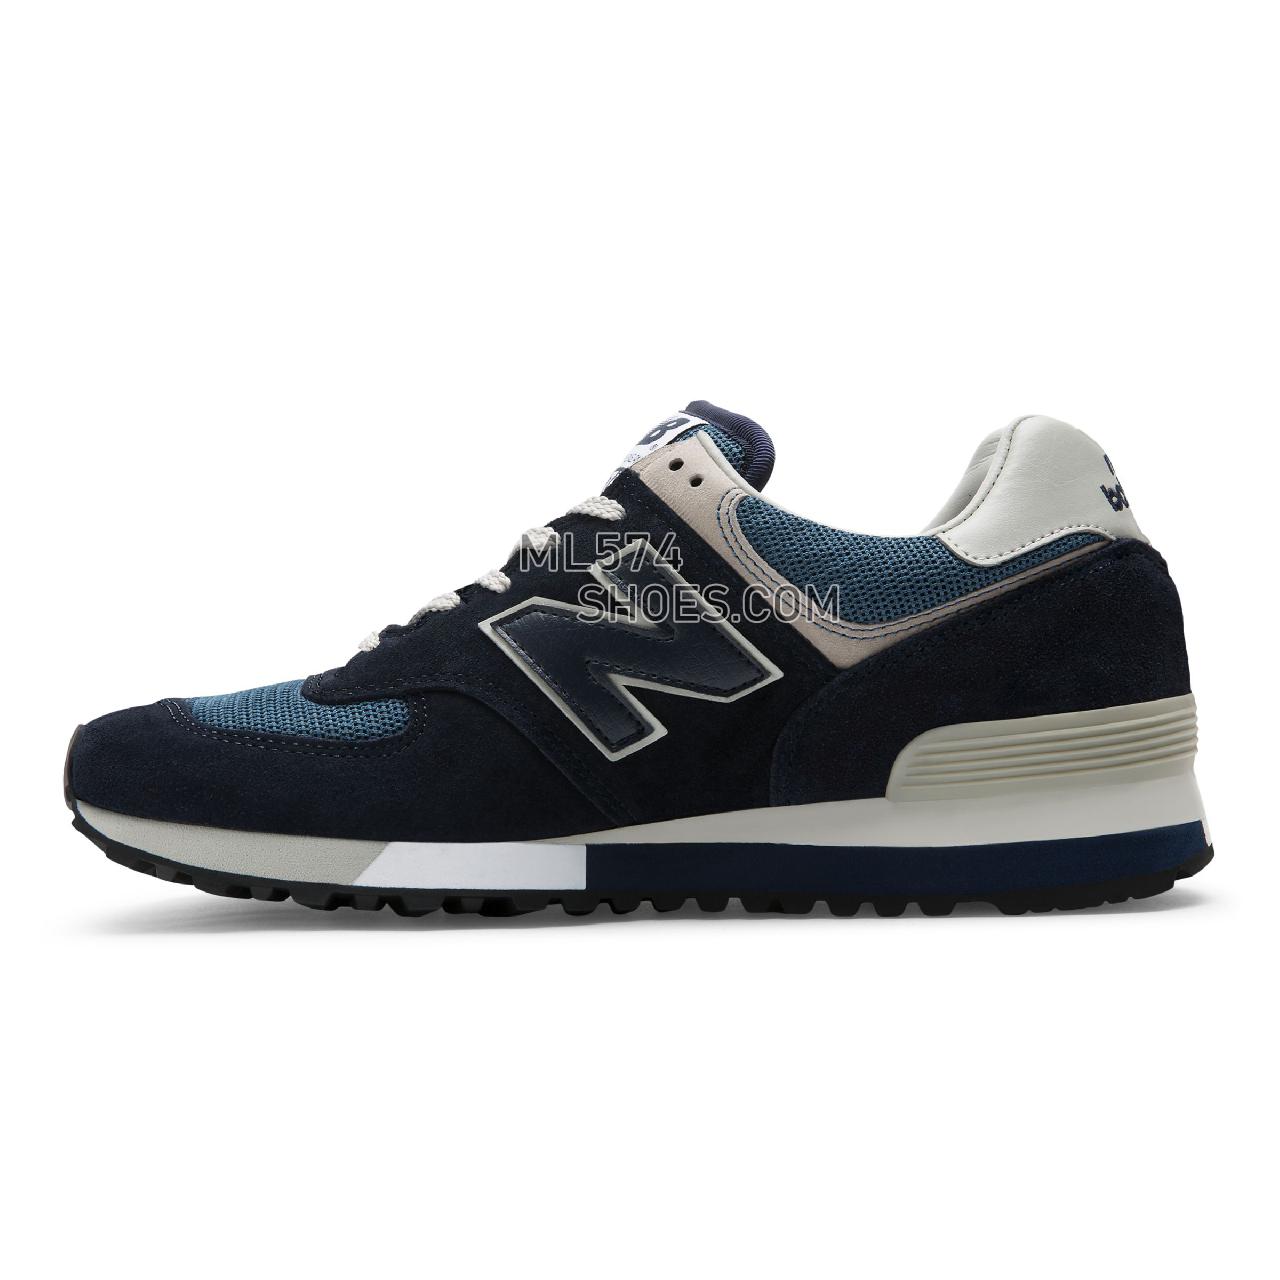 New Balance 576 Made in UK - Men's 576 - Classic Navy with Grey - OM576OGN